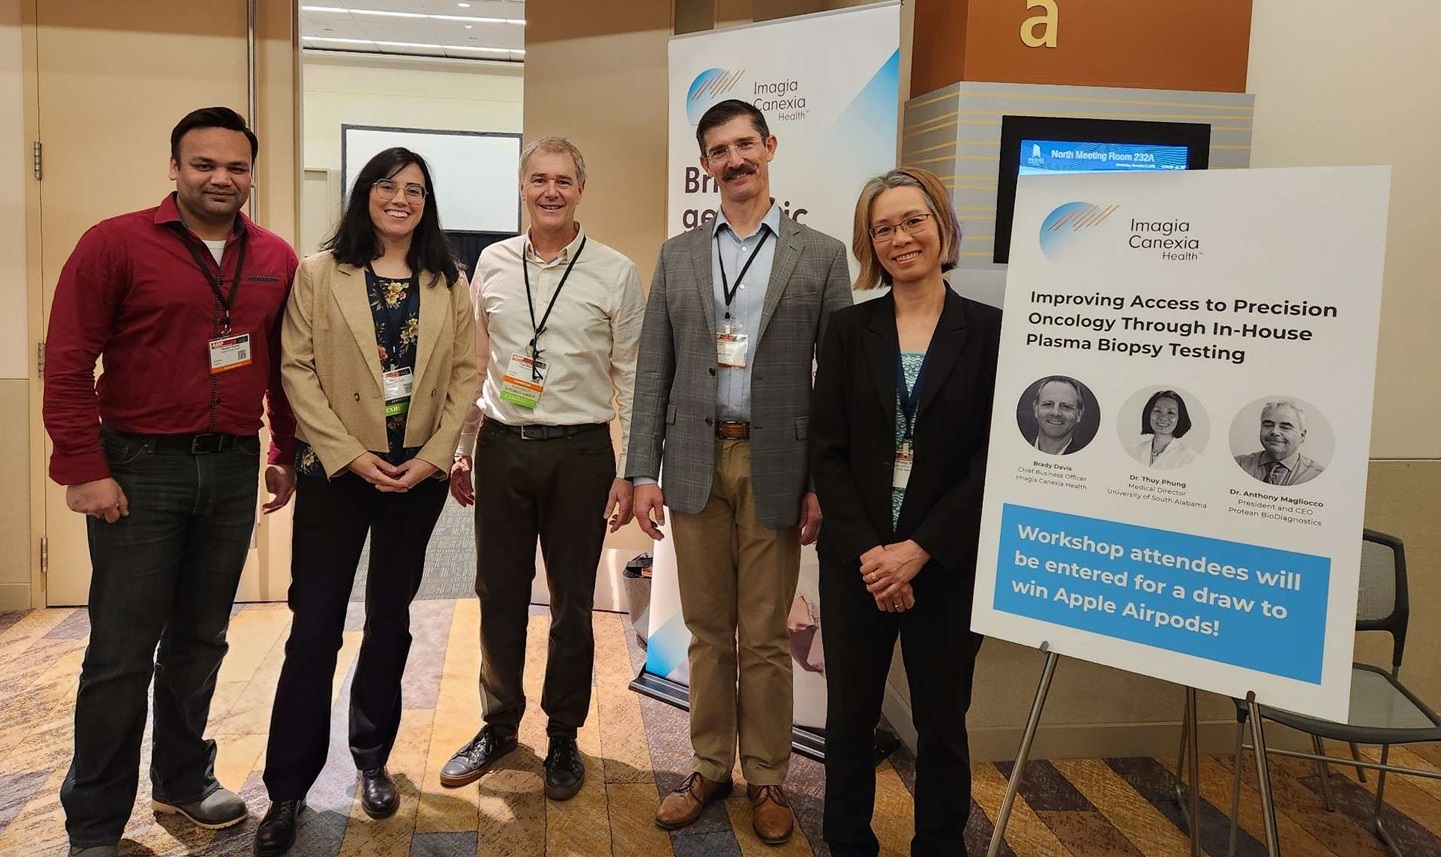 Thuy Phung, M.D., Ph.D., far right, spoke at a corporate workshop during the Association for Molecular Pathology annual meeting.